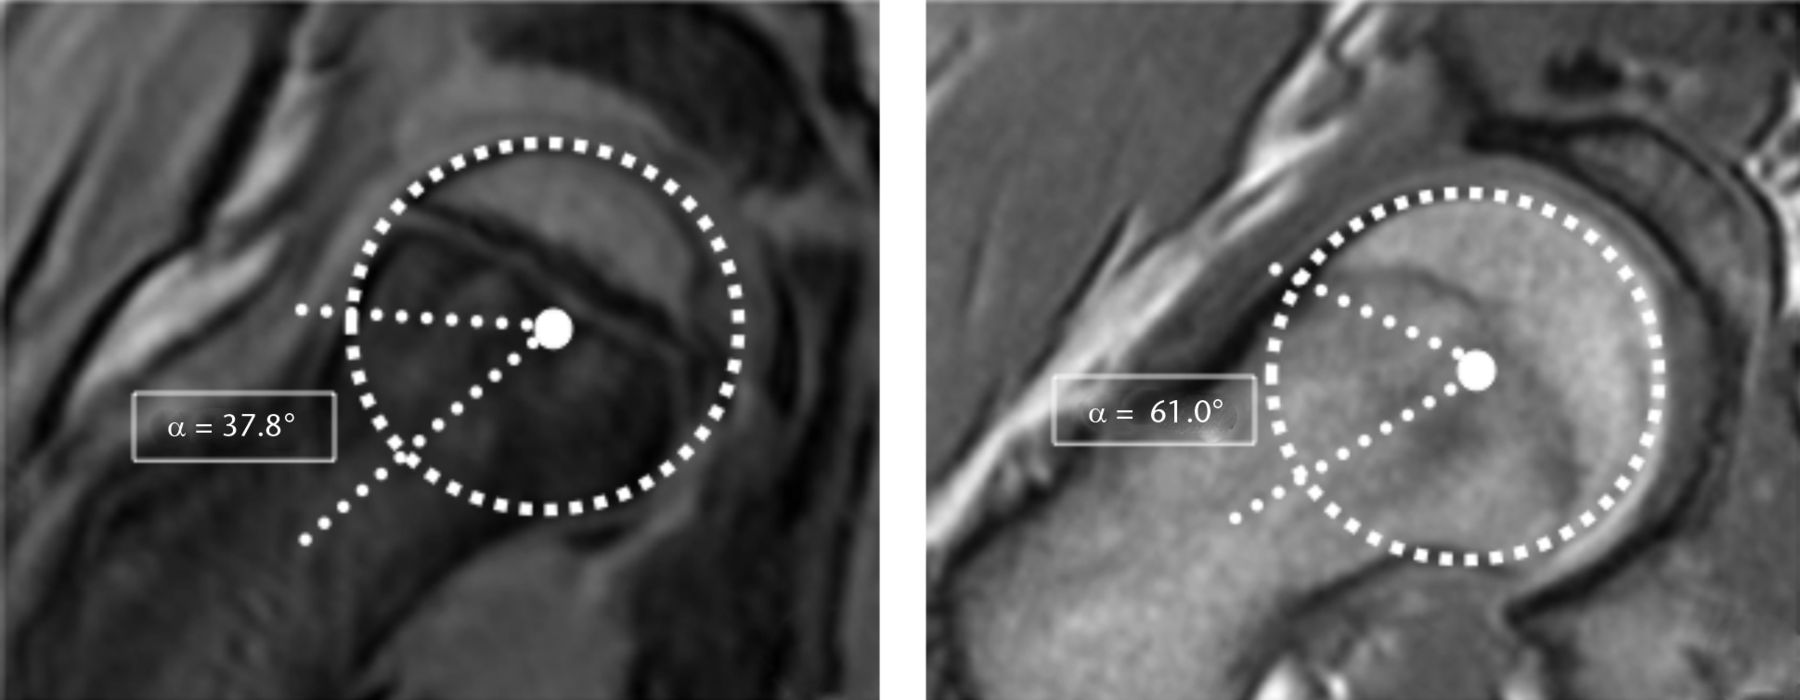 Fig. 4 
          MRI images at the 1:30 position of a)
a ten year old boy with grade 1 physis (completely unfused) with
normal alpha angle, 37.8° and b) a16 year old boy with grade 6 physis
(completely fused) and elevated alpha angle, 61.0°, constituting
a cam deformity.
        